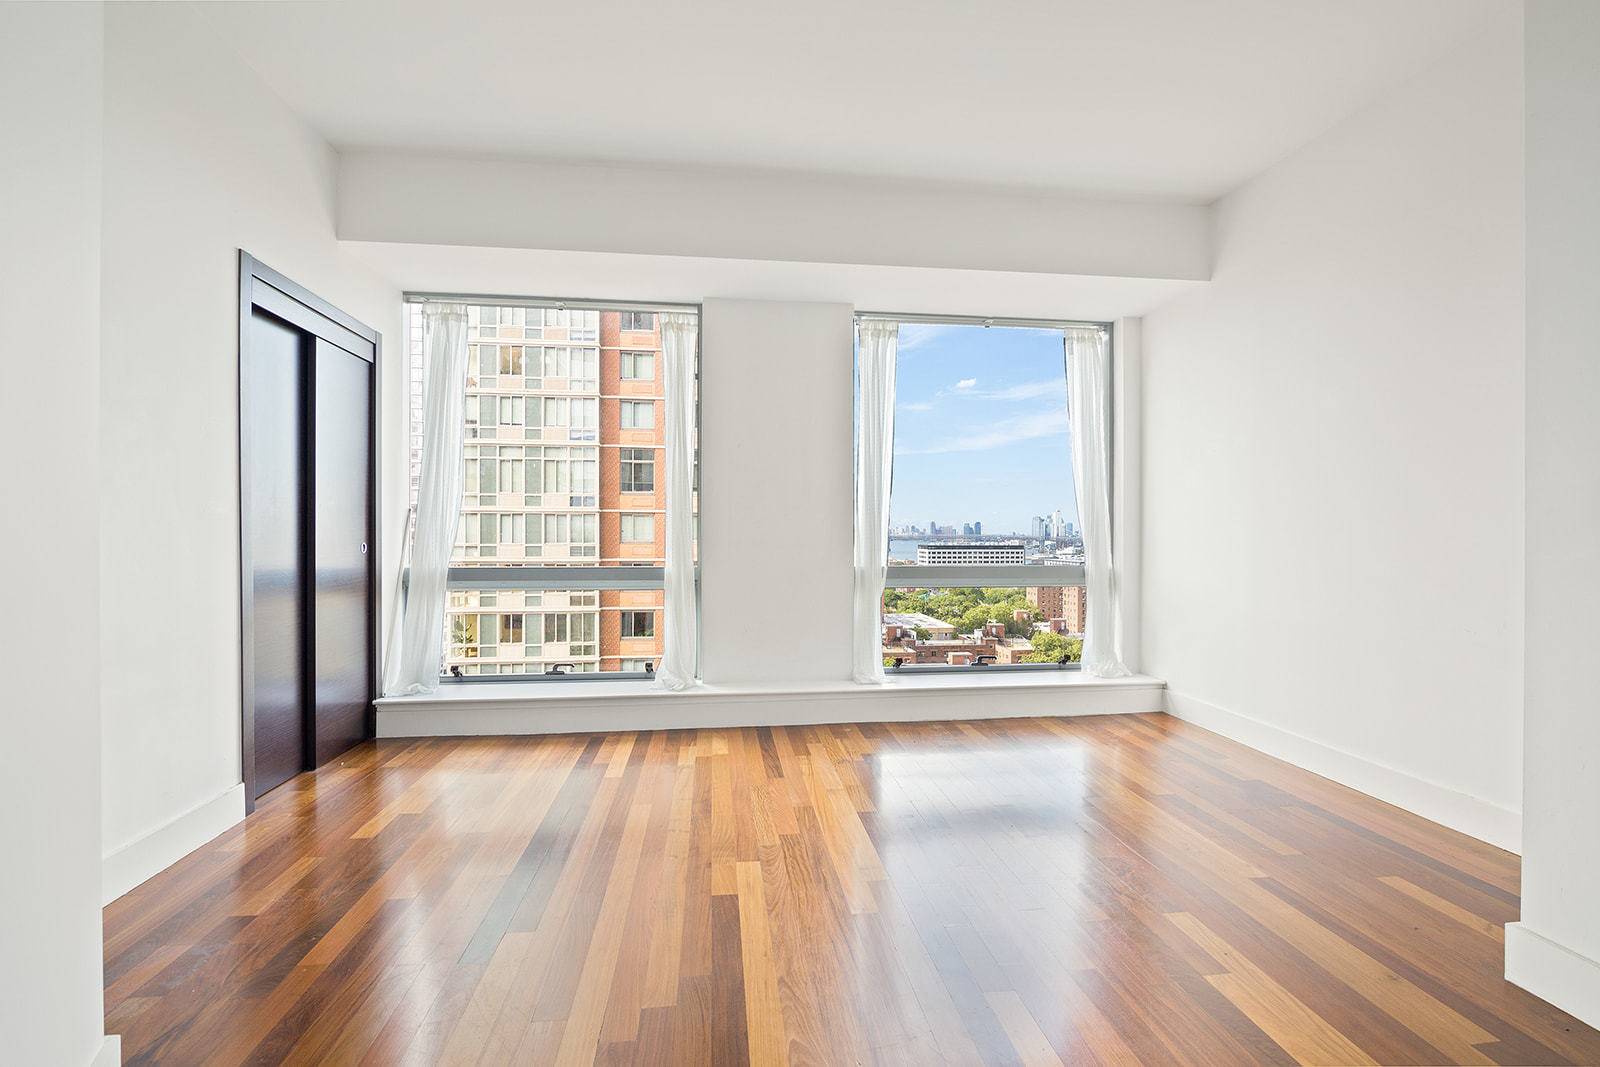 NO BROKER FEE, residence 1402 is a beautiful bright condo studio built with a penthouse loft in mind.